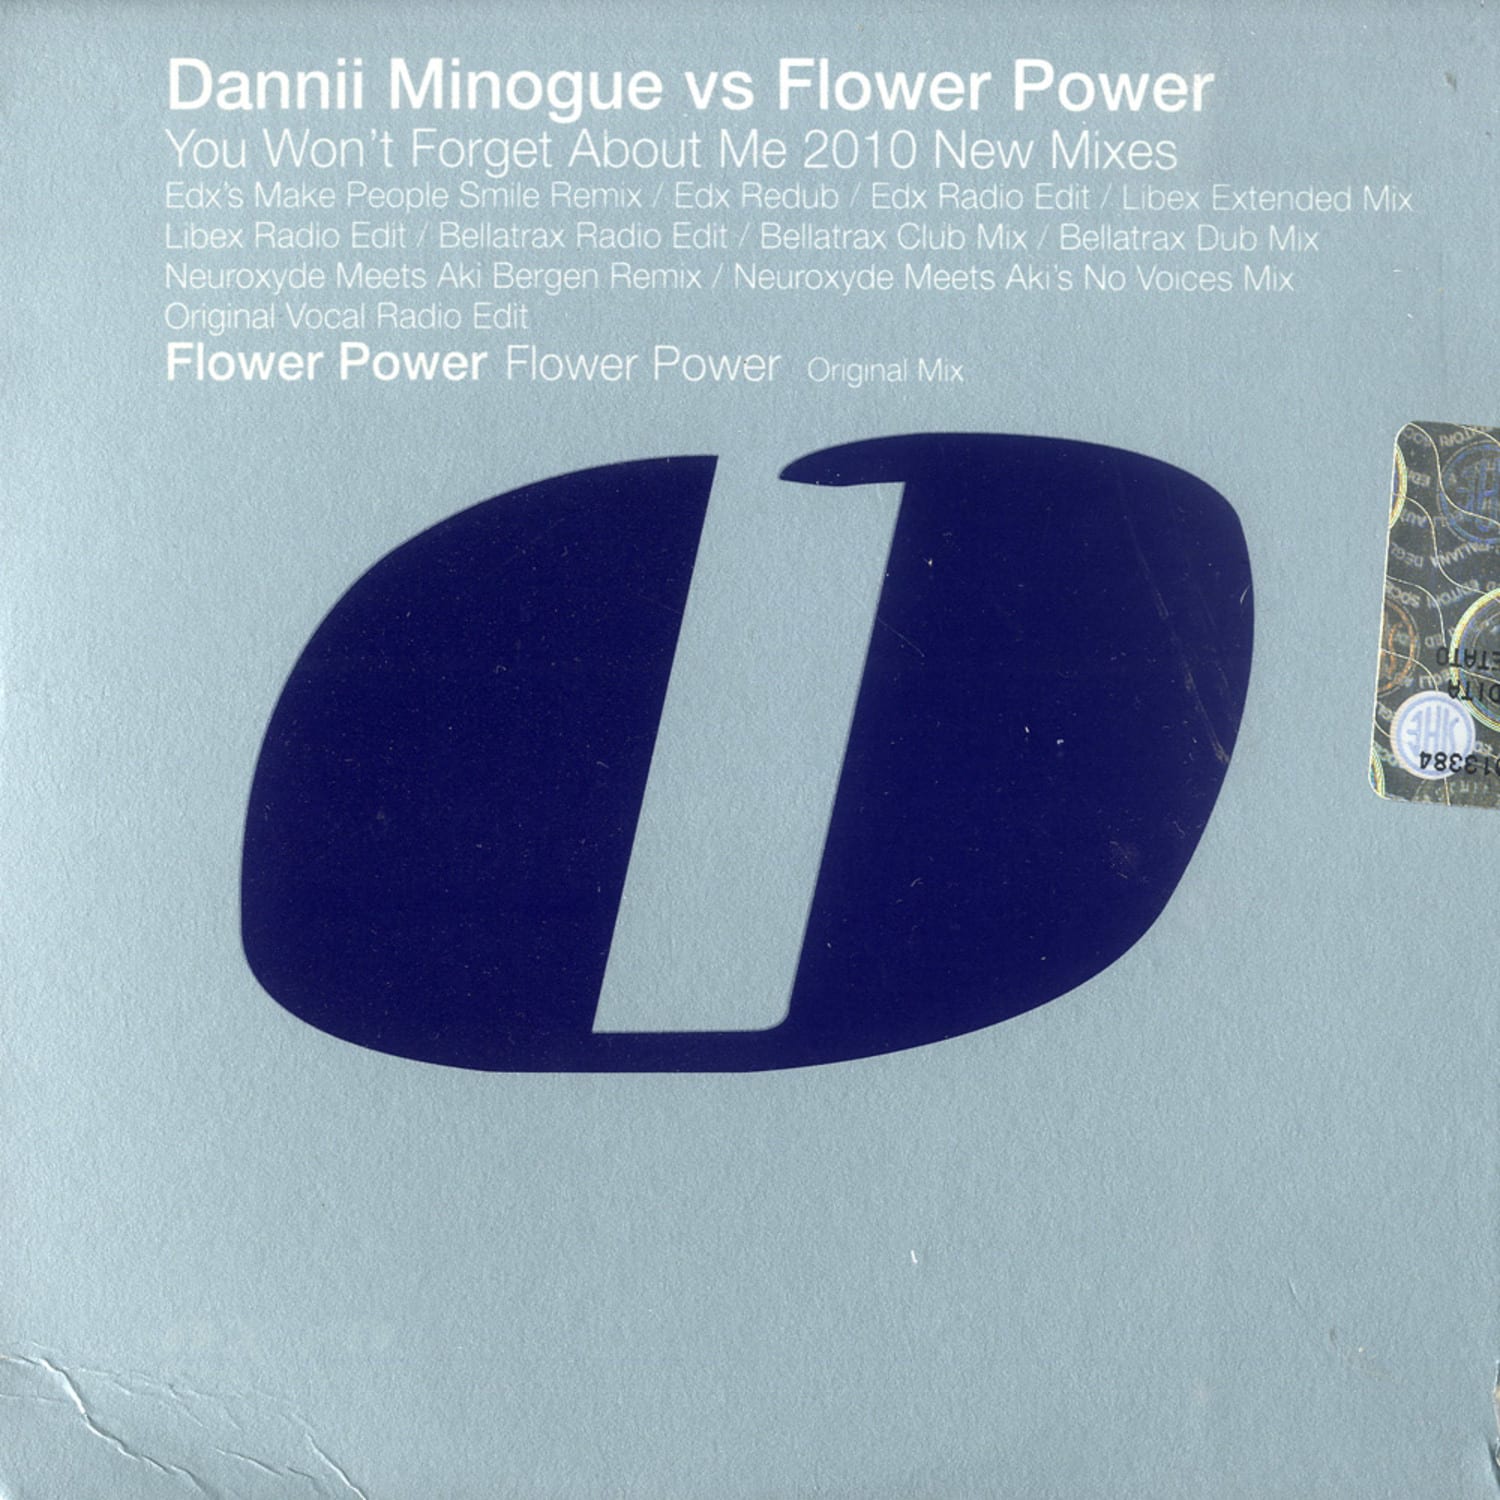 Dannii Minogue Vs. Flower Power - YOU WON T FORGET ABOUT ME 2010 